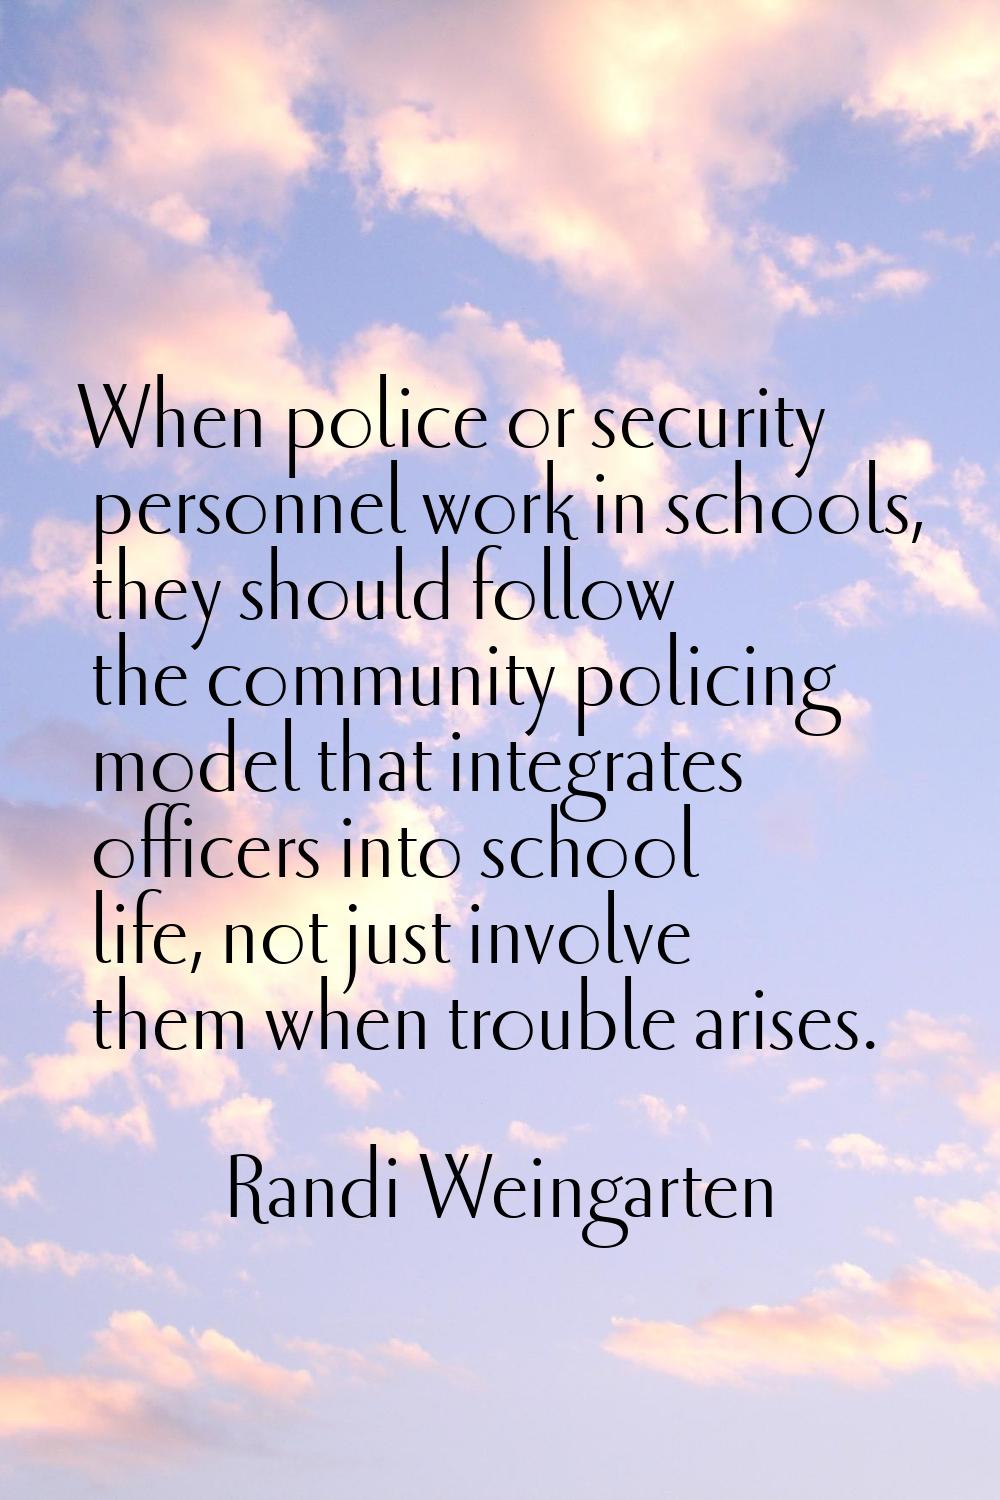 When police or security personnel work in schools, they should follow the community policing model 